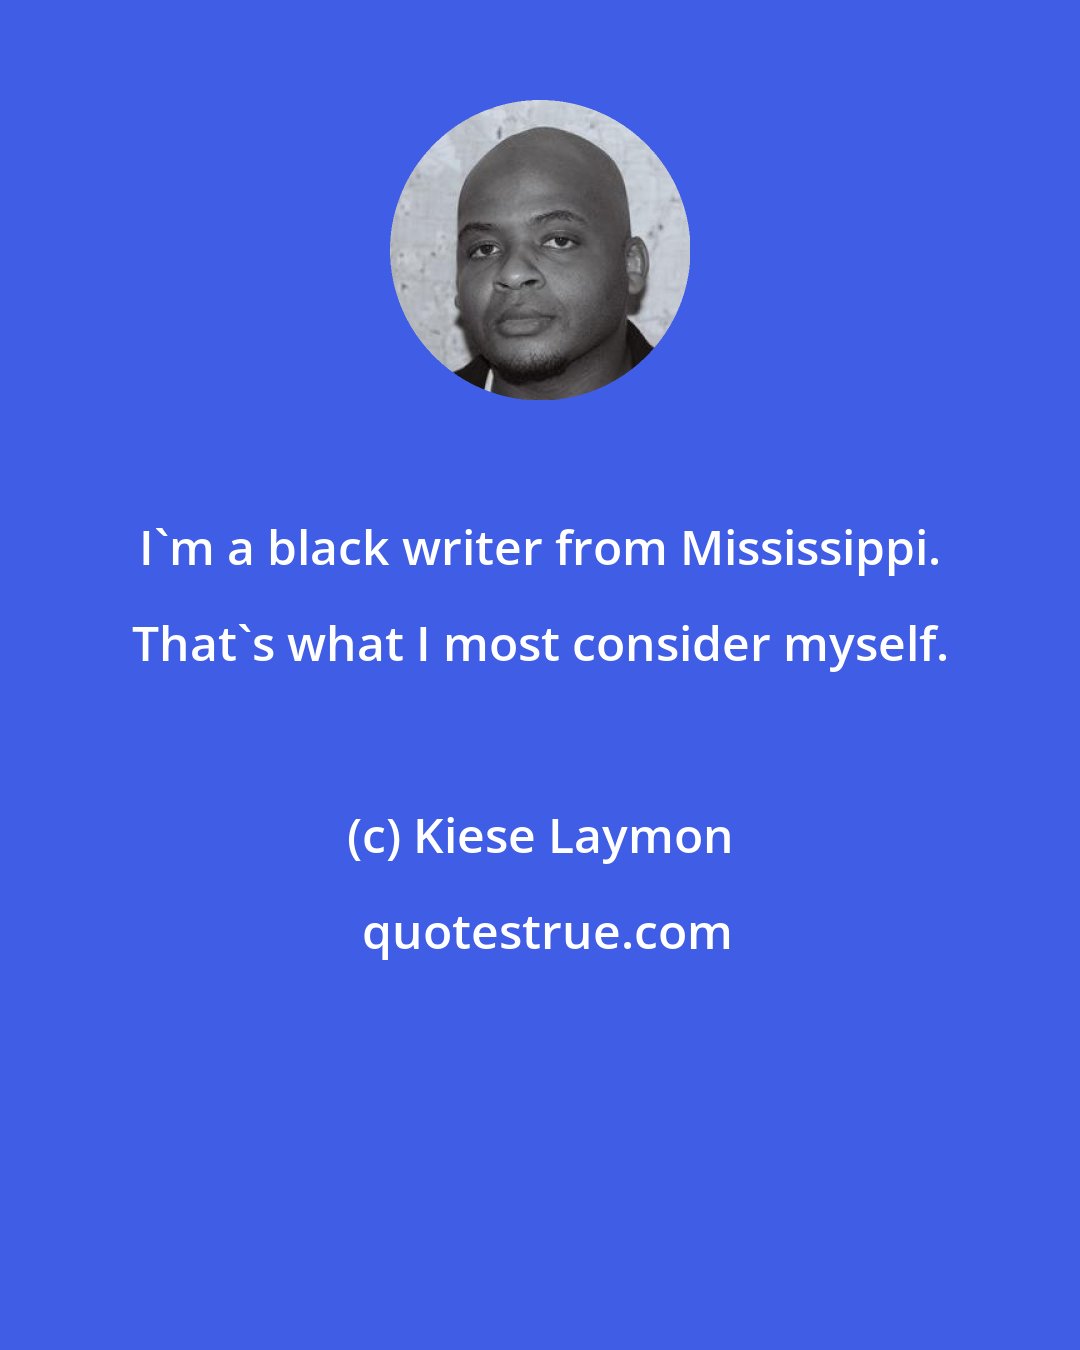 Kiese Laymon: I'm a black writer from Mississippi. That's what I most consider myself.